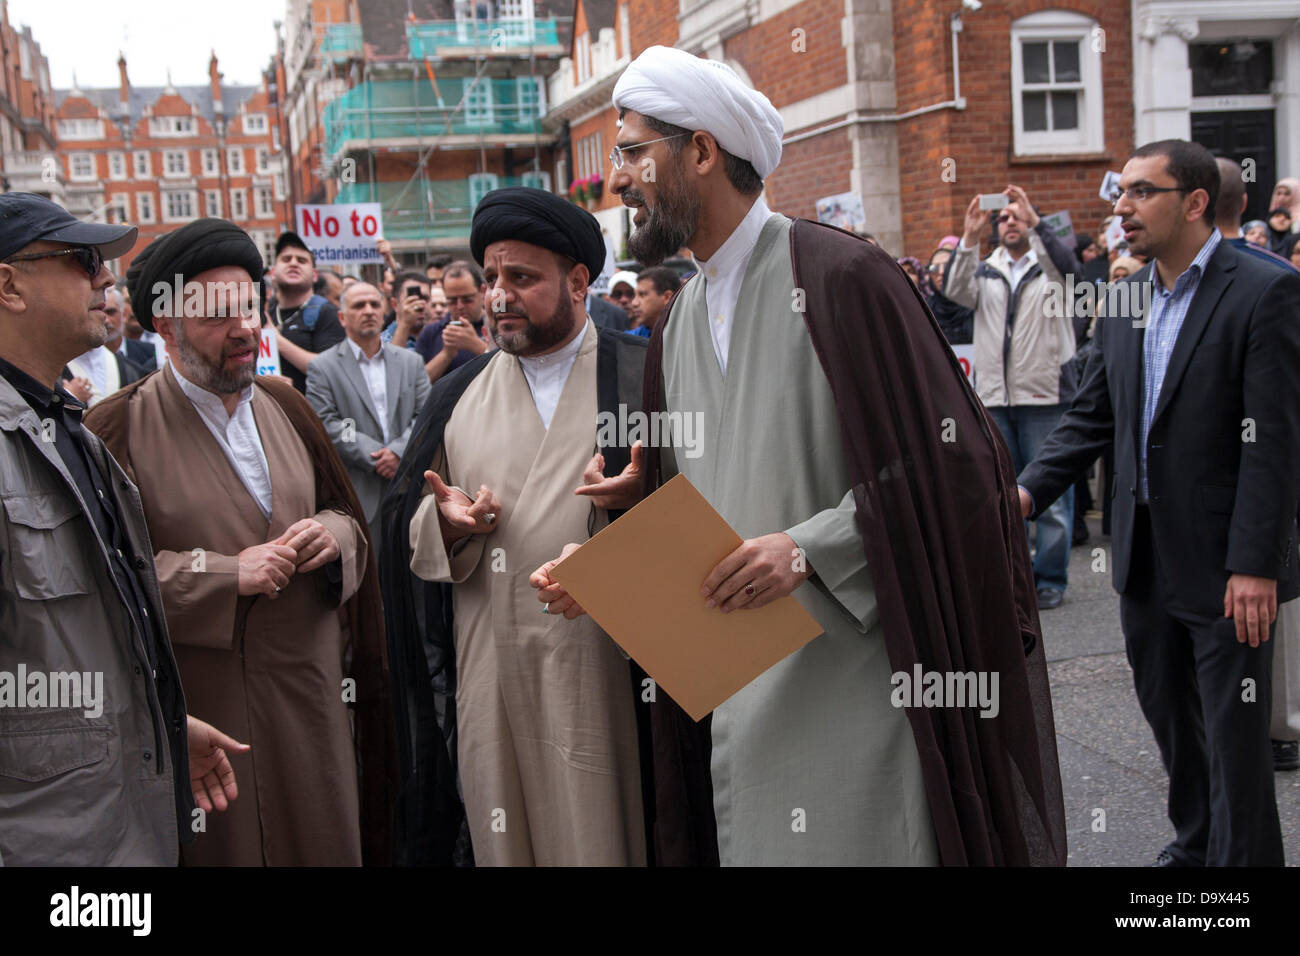 London, UK. 27th June 2013. A Muslim cleric prepares to enter the Egyptian embassy to deliver a letter to the Ambassador as Egyptians in London protest against sectarian killings in Egypt. Credit:  Paul Davey/Alamy Live News Stock Photo